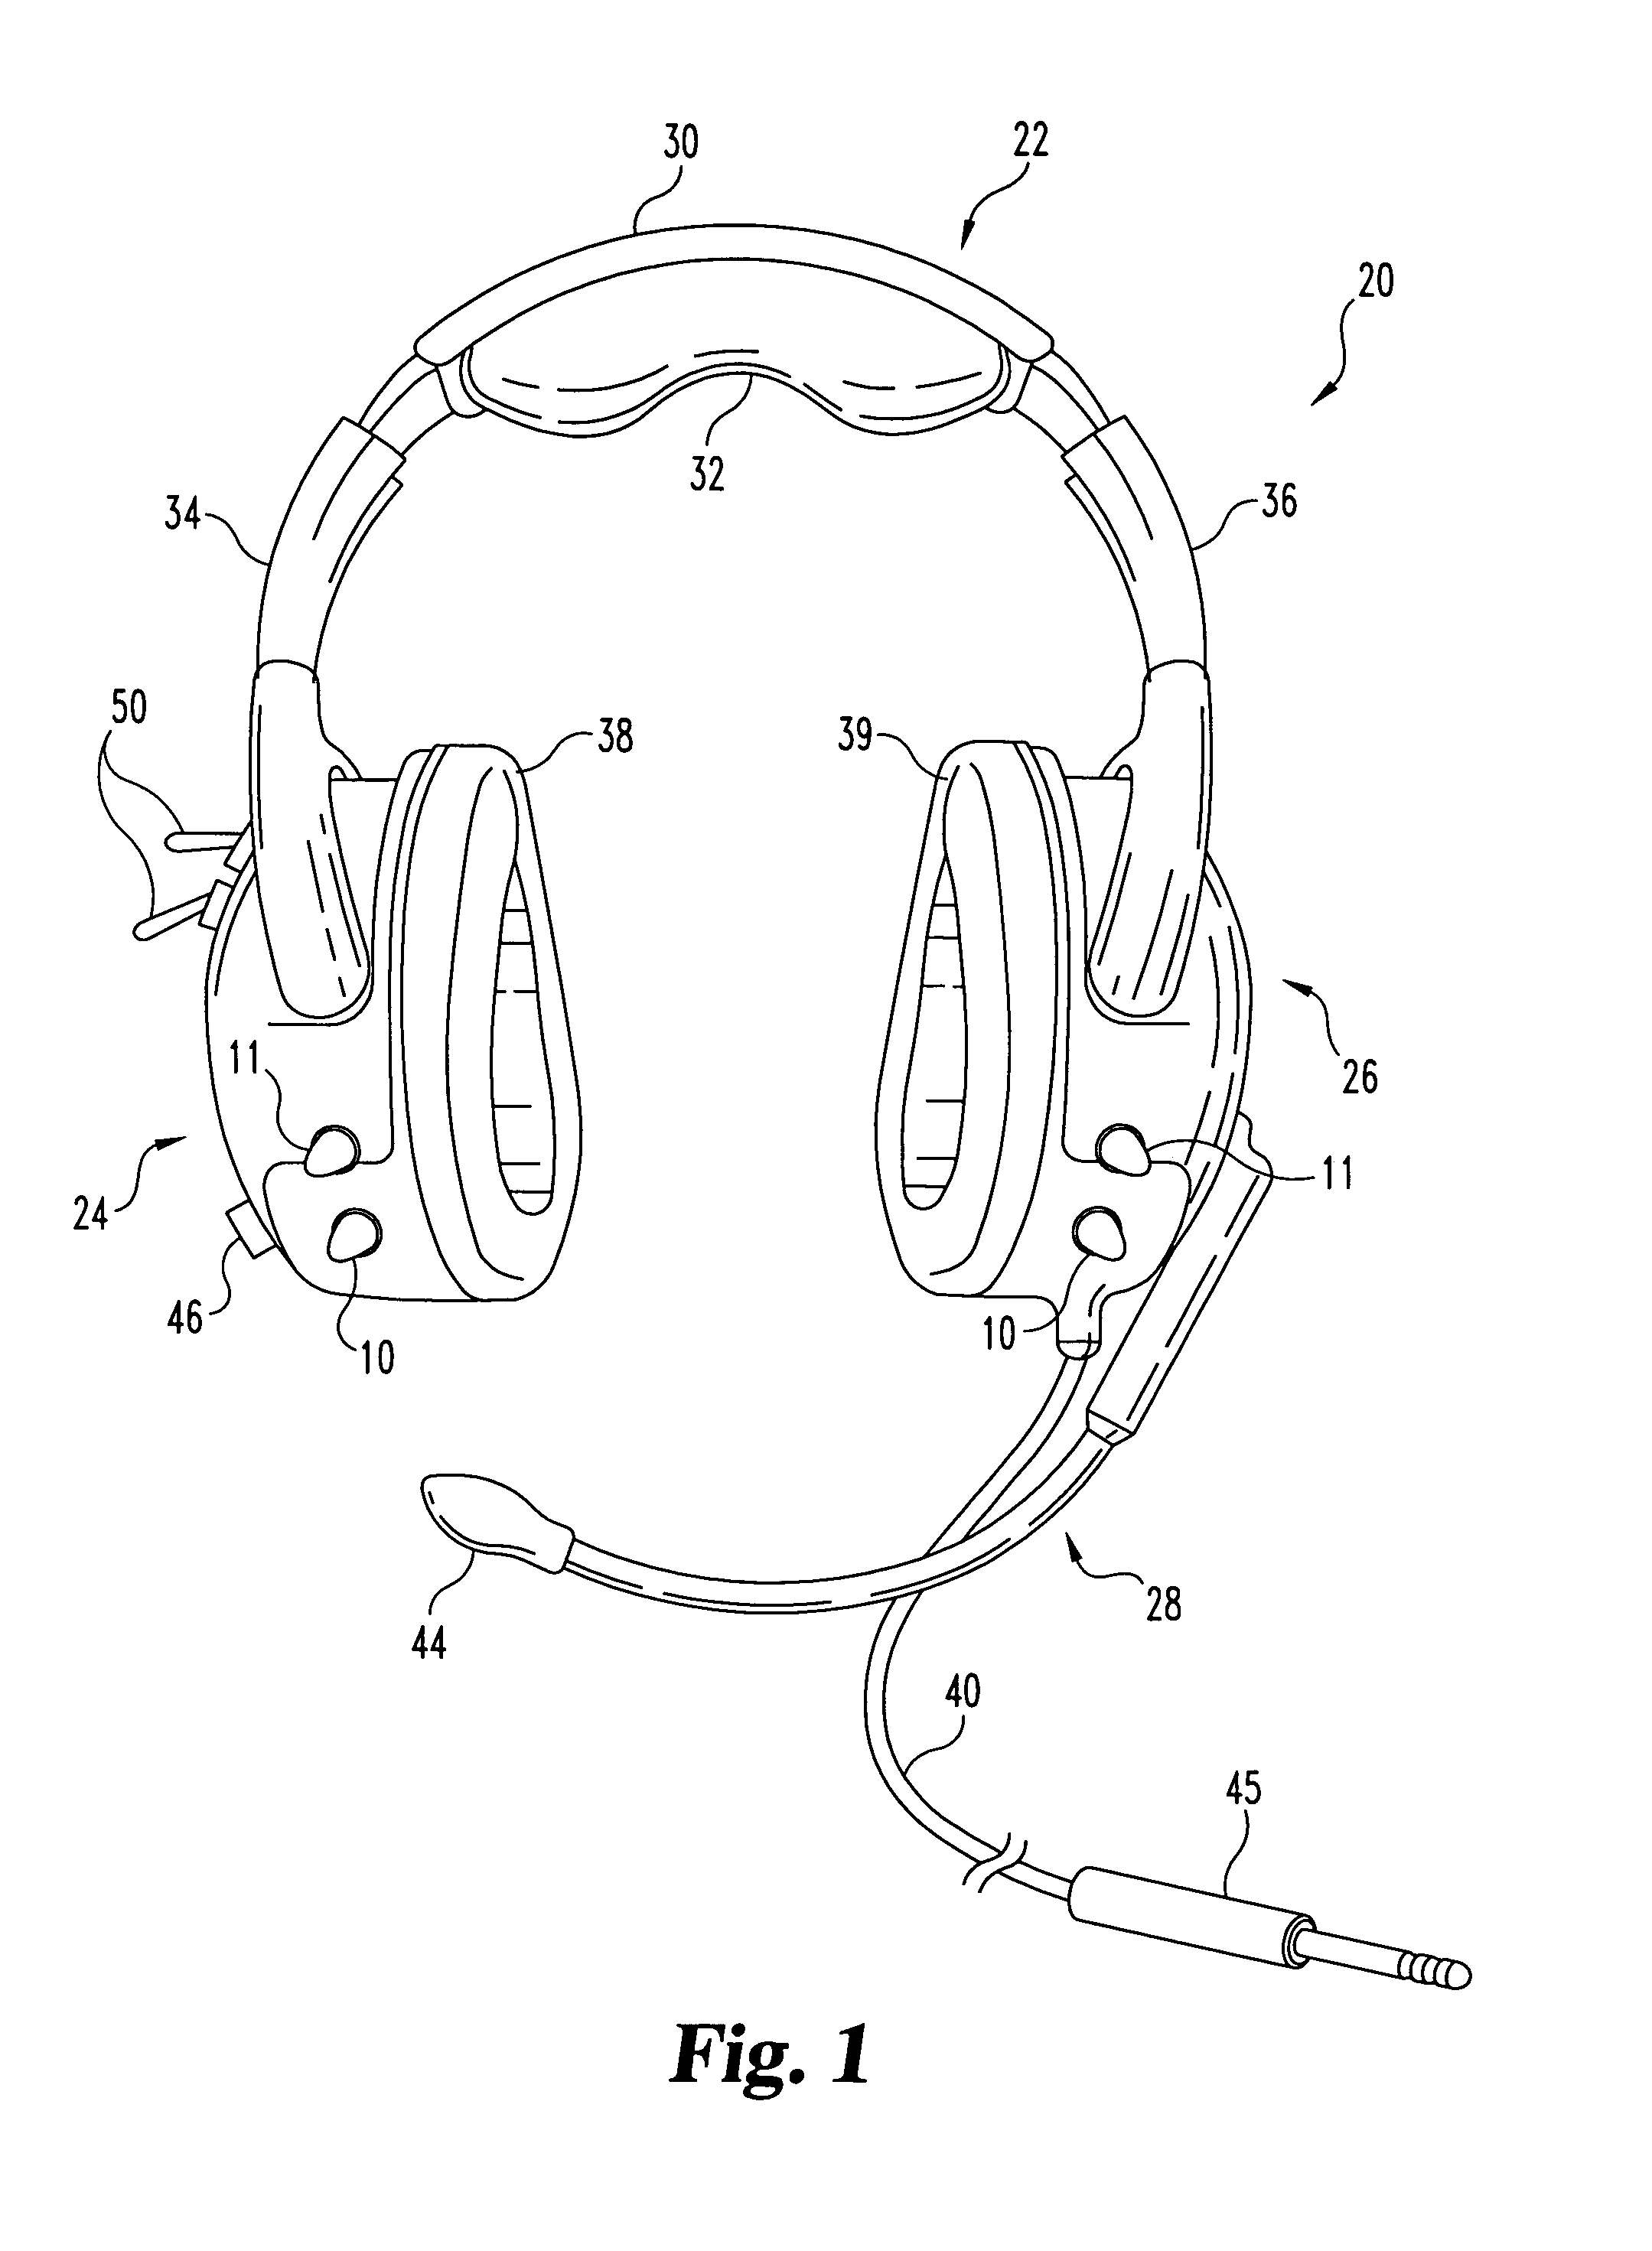 Illumination systems and methods of use